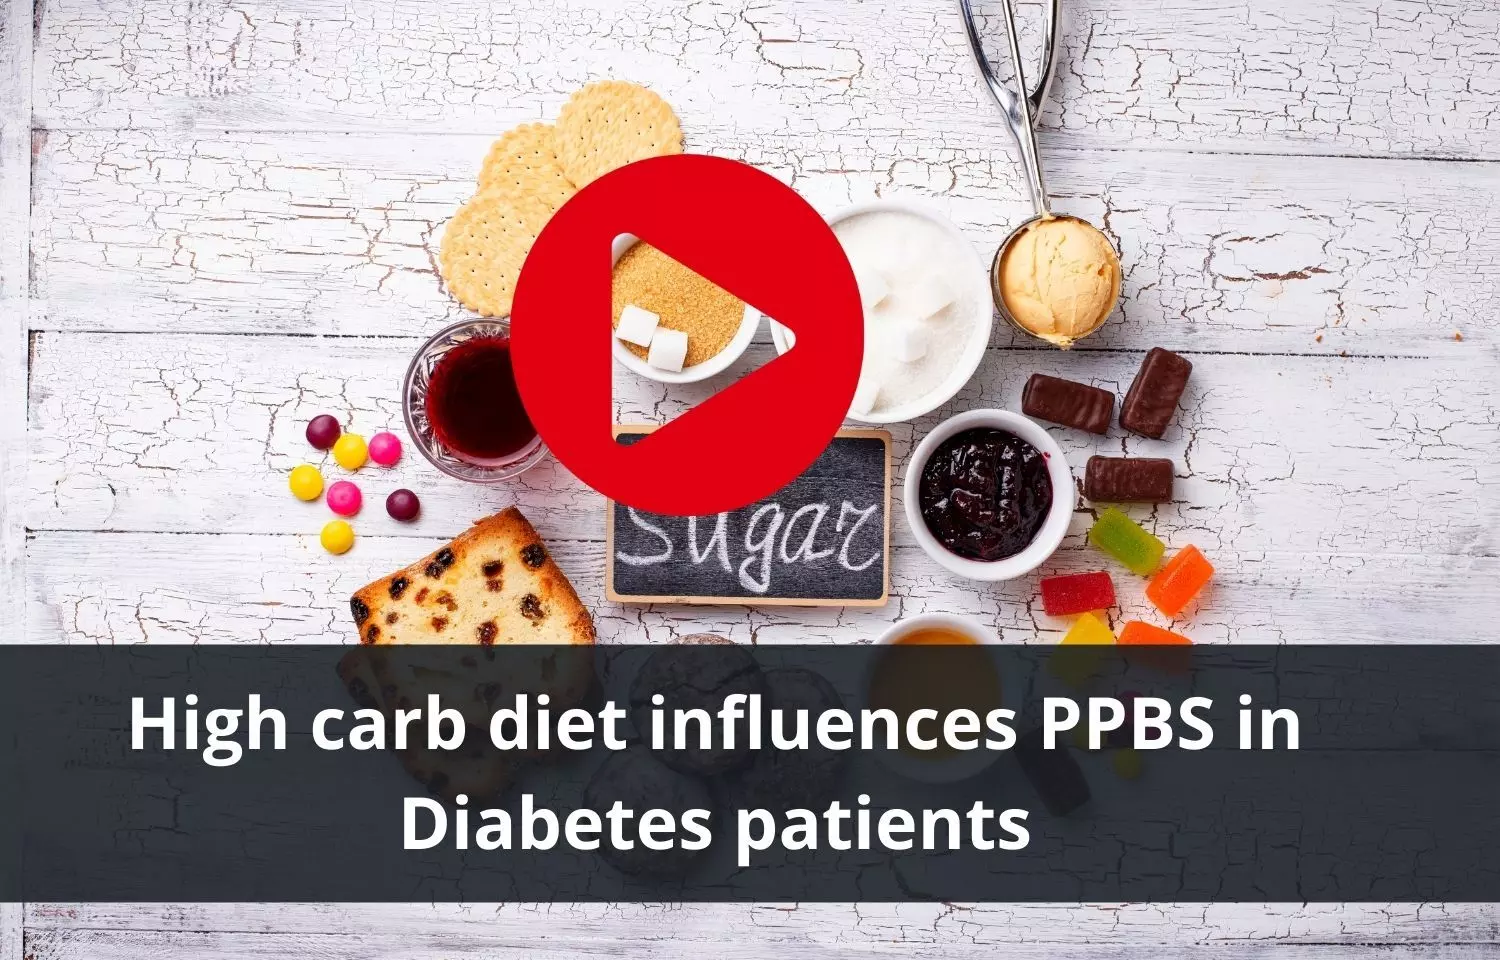 Post blood sugar to be influenced by high carb diets in diabetics